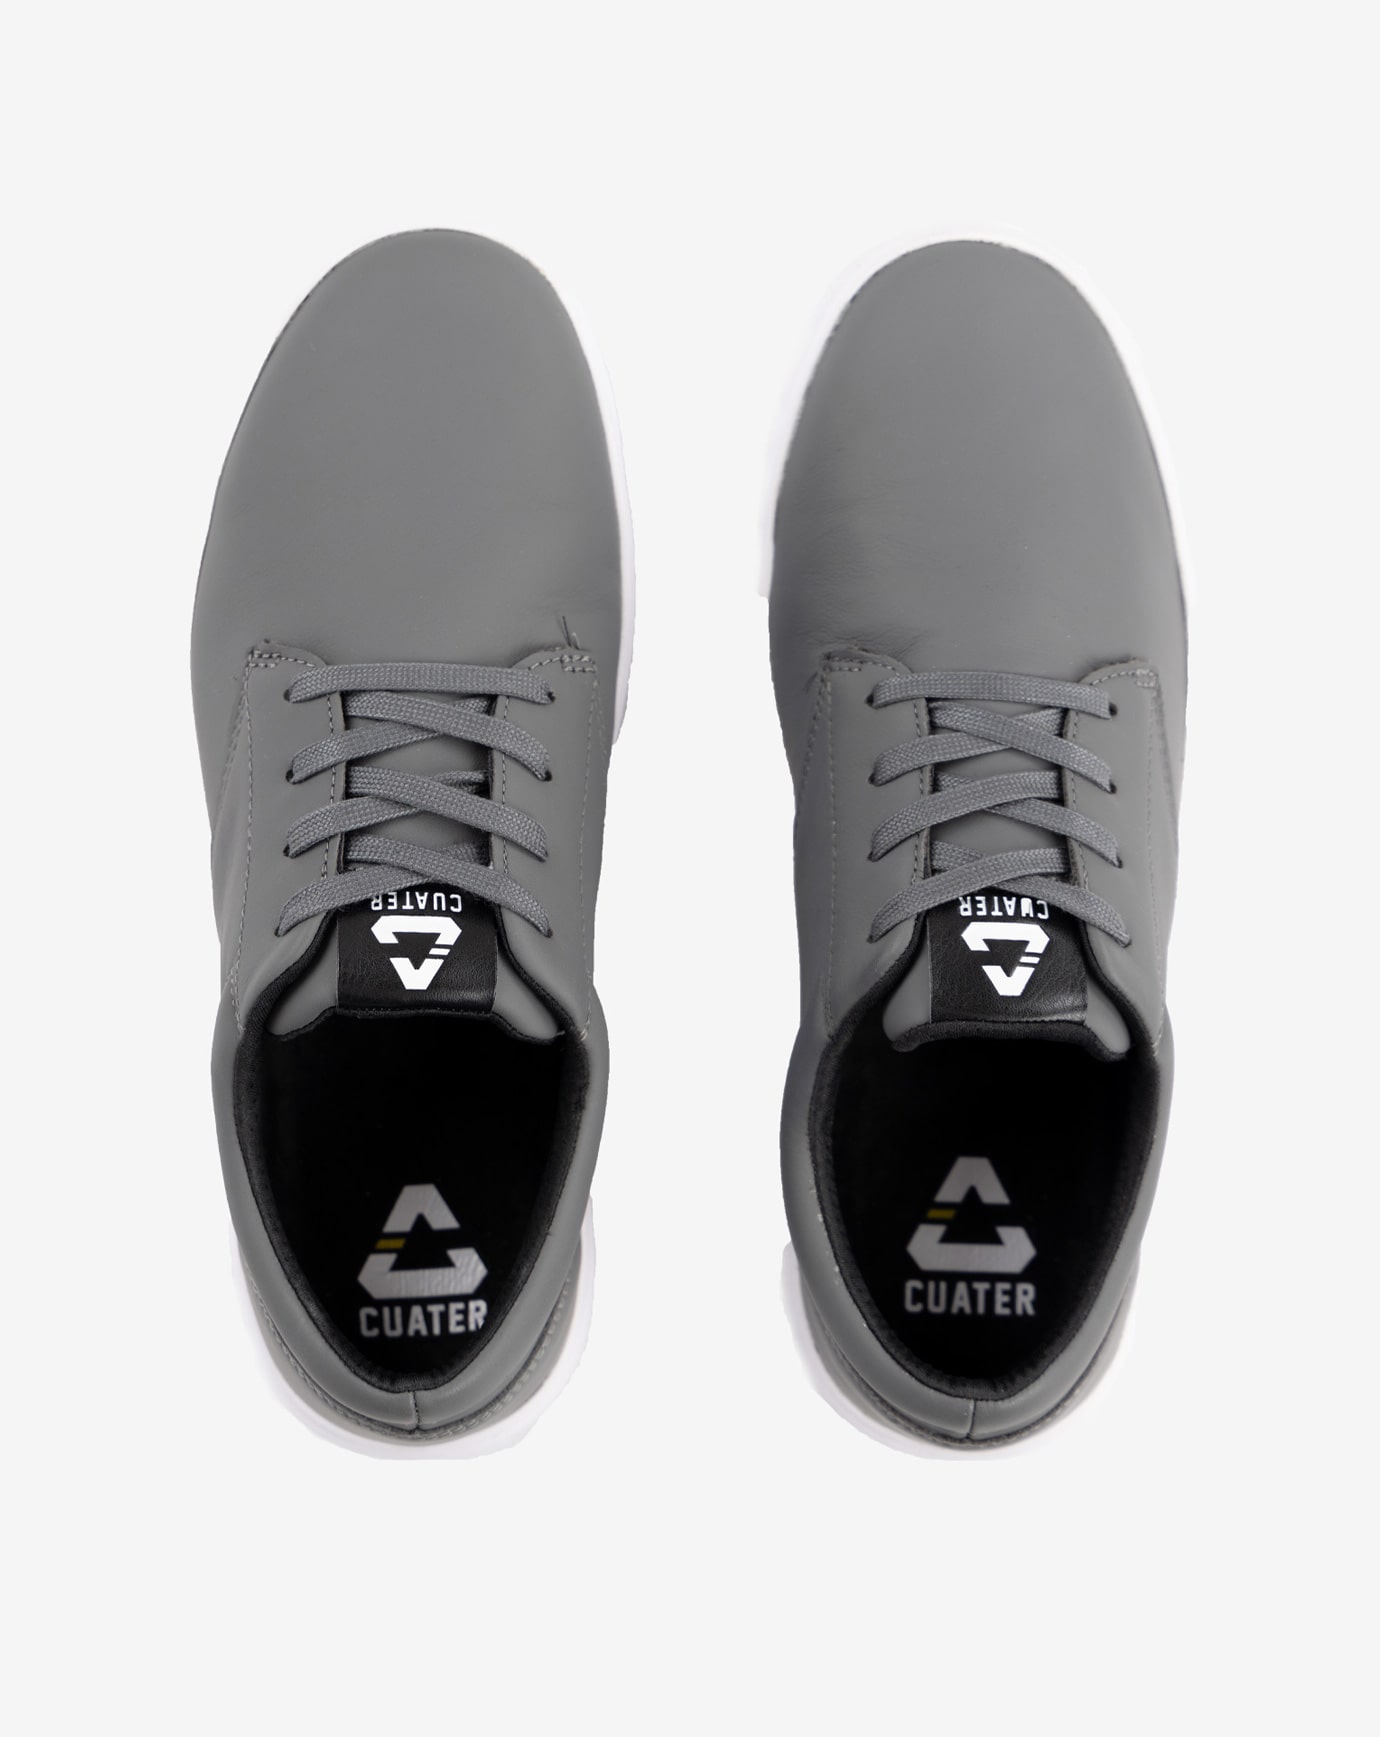 THE WILDCARD LEATHER SPIKELESS GOLF SHOE Image 4